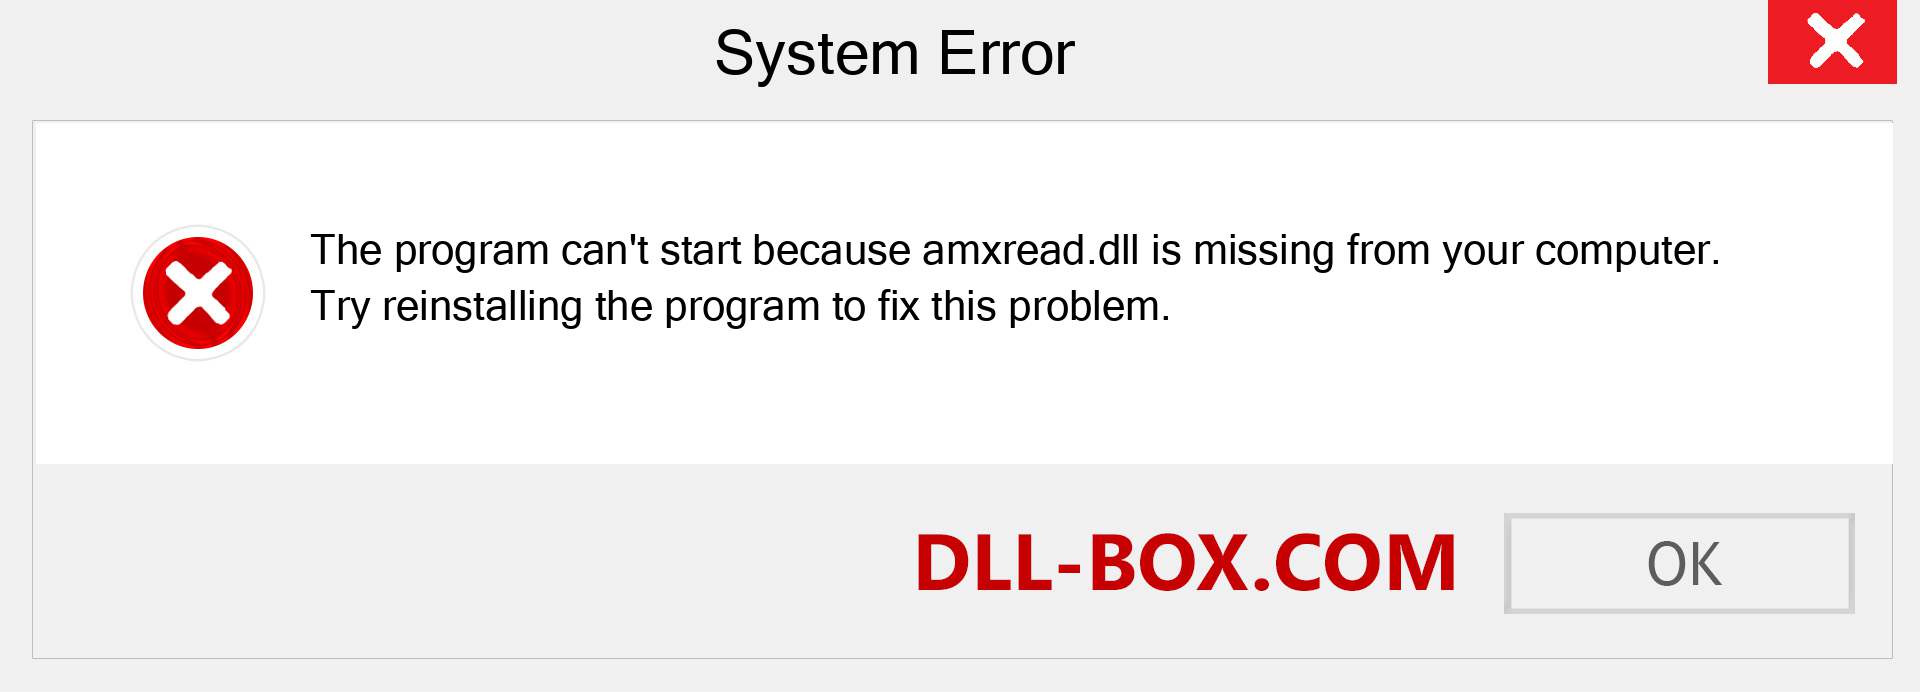  amxread.dll file is missing?. Download for Windows 7, 8, 10 - Fix  amxread dll Missing Error on Windows, photos, images